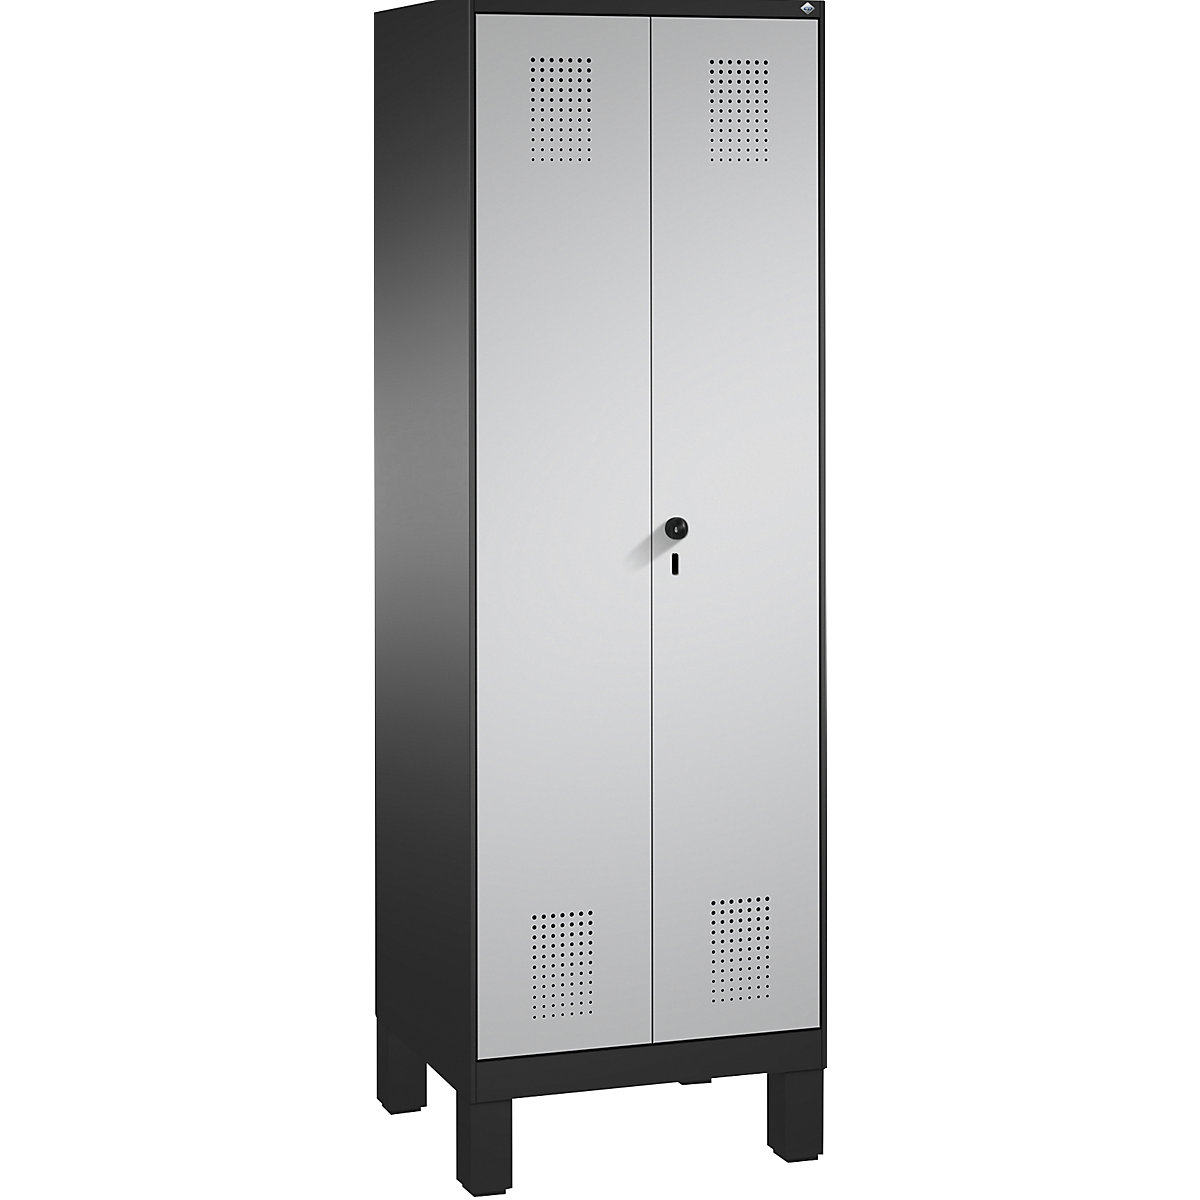 EVOLO storage cupboard, doors close in the middle, with feet – C+P, 2 compartments, 8 shelves, compartment width 300 mm, black grey / white aluminium